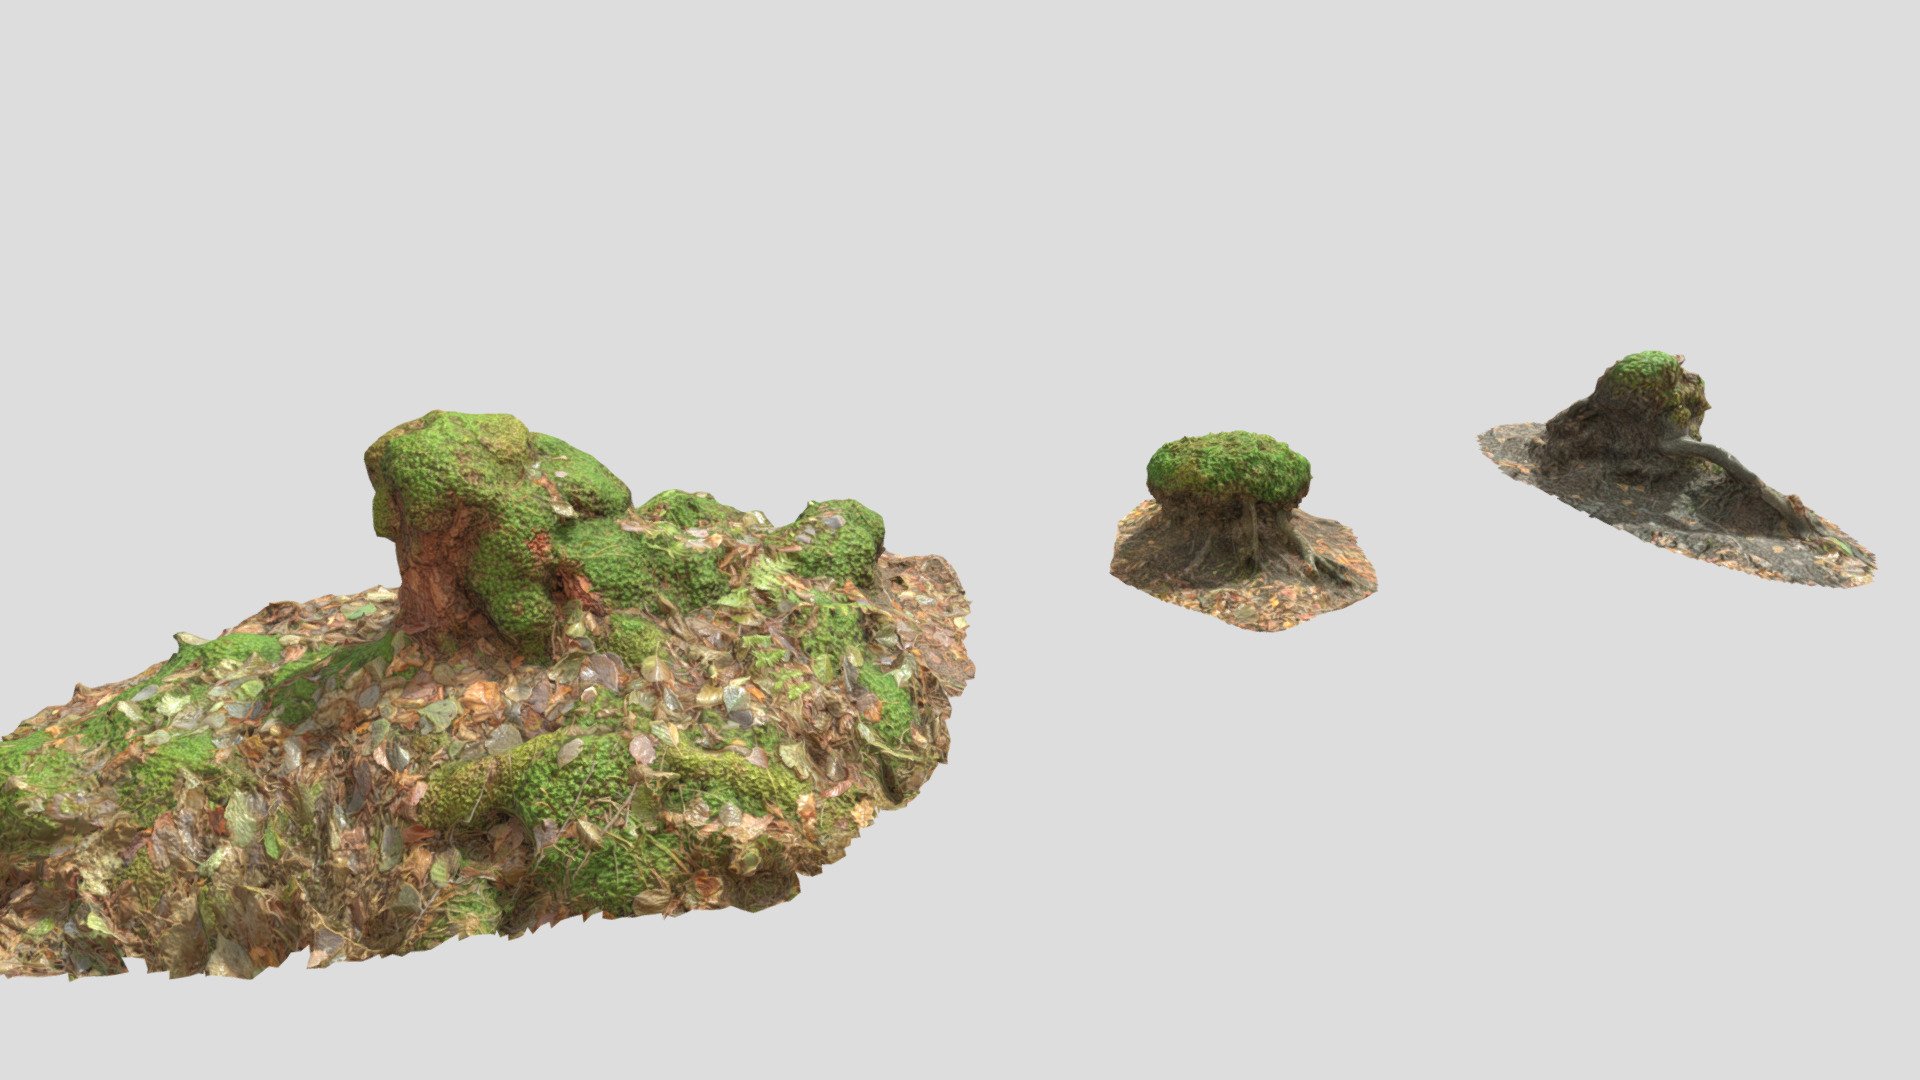 Fully processed 3D scans: no light information, color-matched, etc.

Ready to use for all kind of CGI

4K Textures:
- normal map
- albedo
- roughness

Realistic Stump Mossy - Swamp Tree Moss Stumps Scan - Buy Royalty Free 3D model by Per's Scan Collection (@perz_scans) 3d model